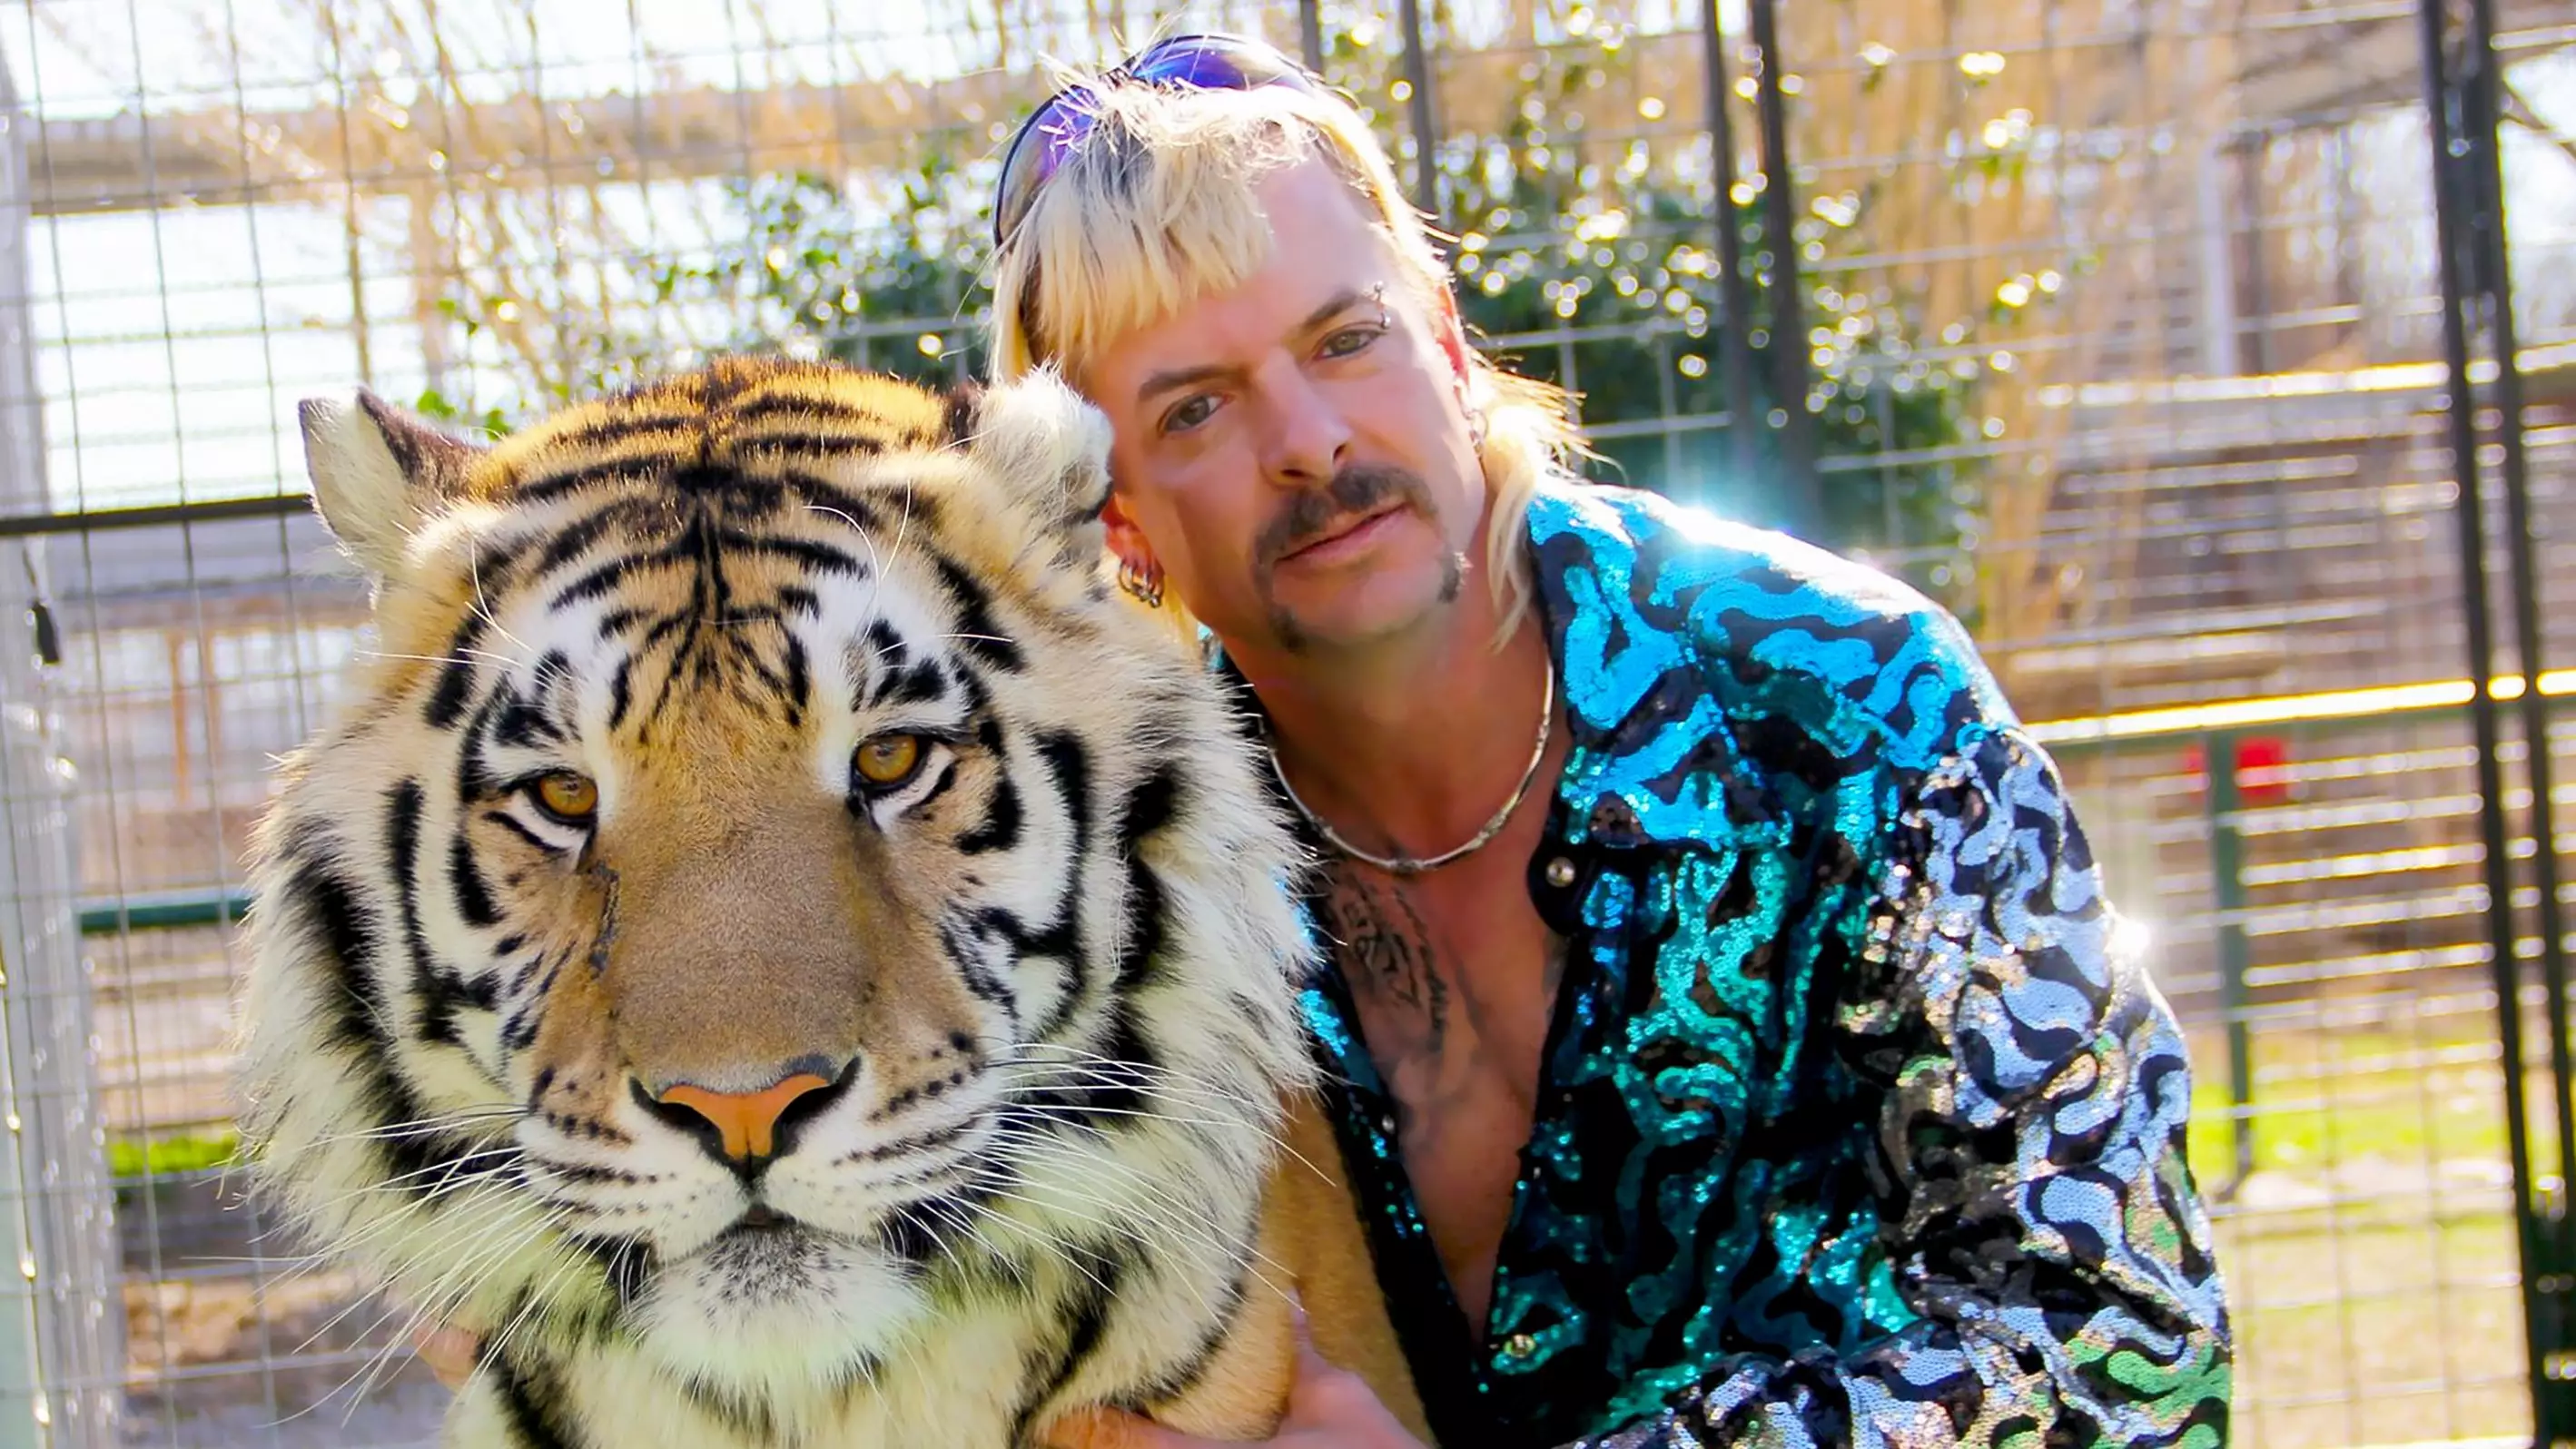 Jared Leto dressed up as Joe Exotic from viral Netflix documentary Tiger King.